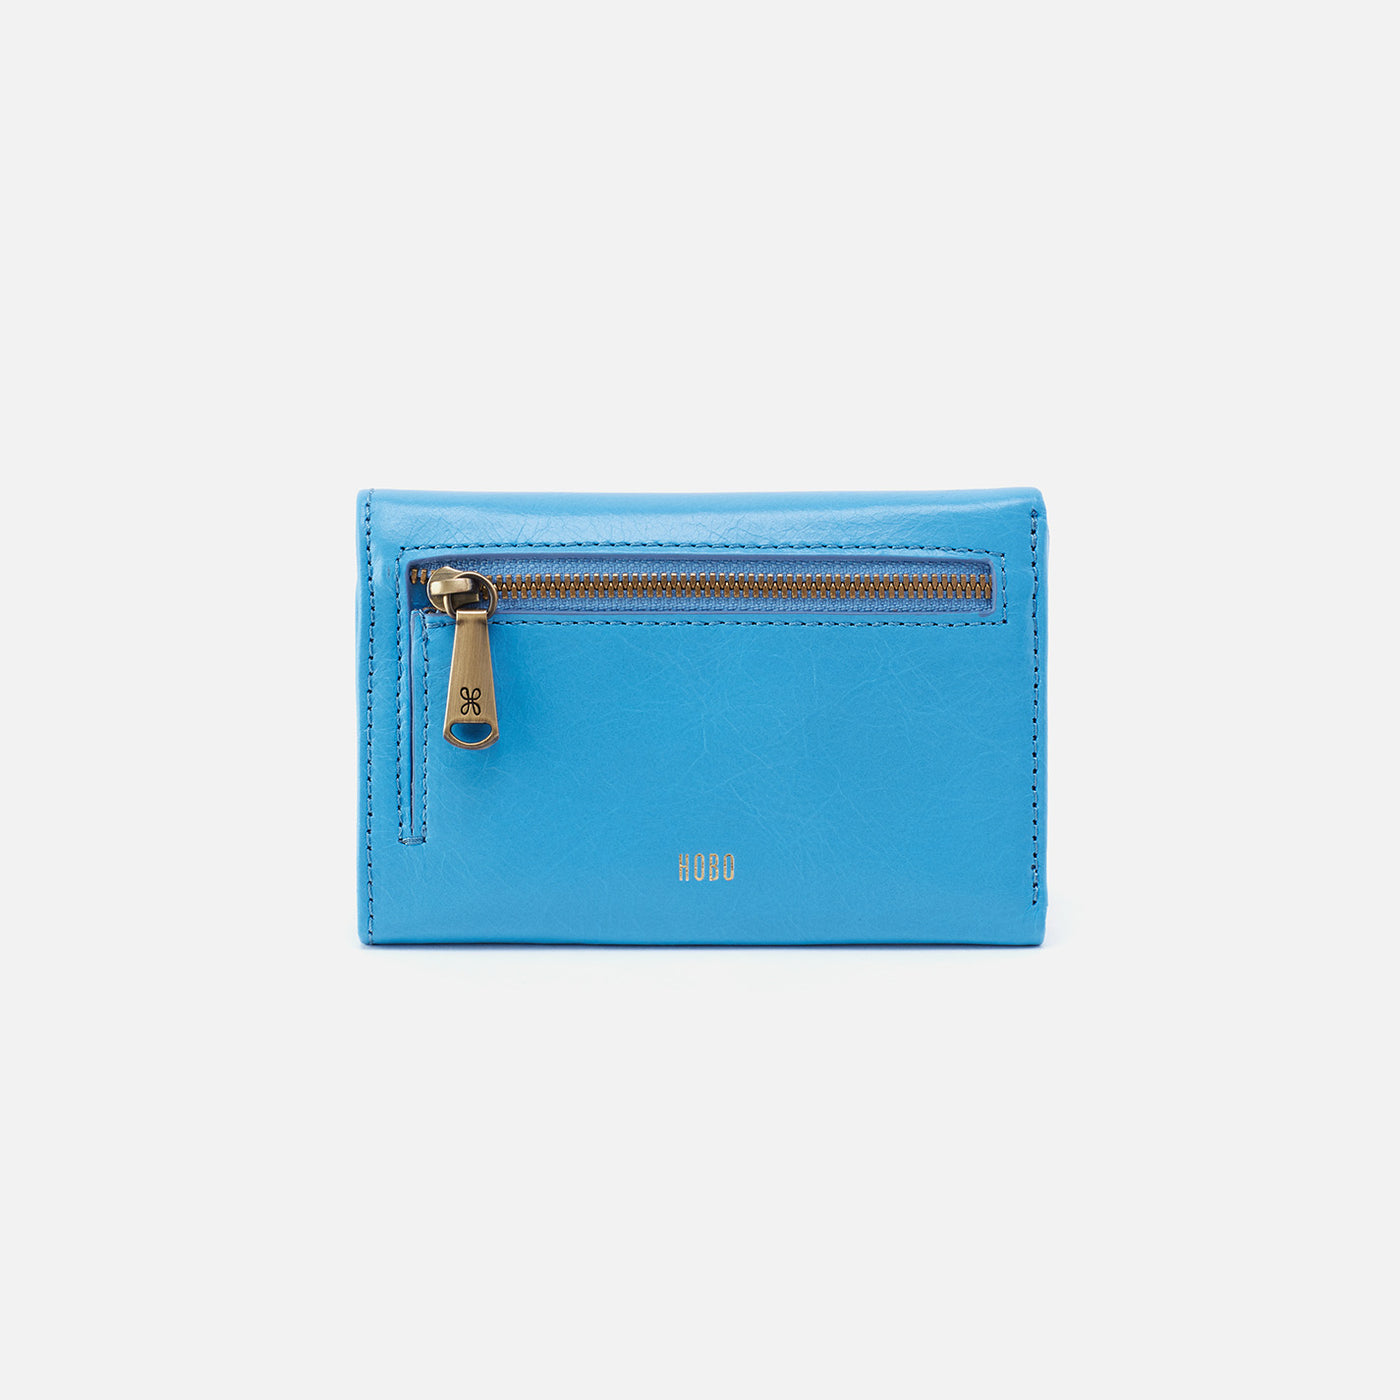 Jill Trifold Wallet in Polished Leather - Tranquil Blue